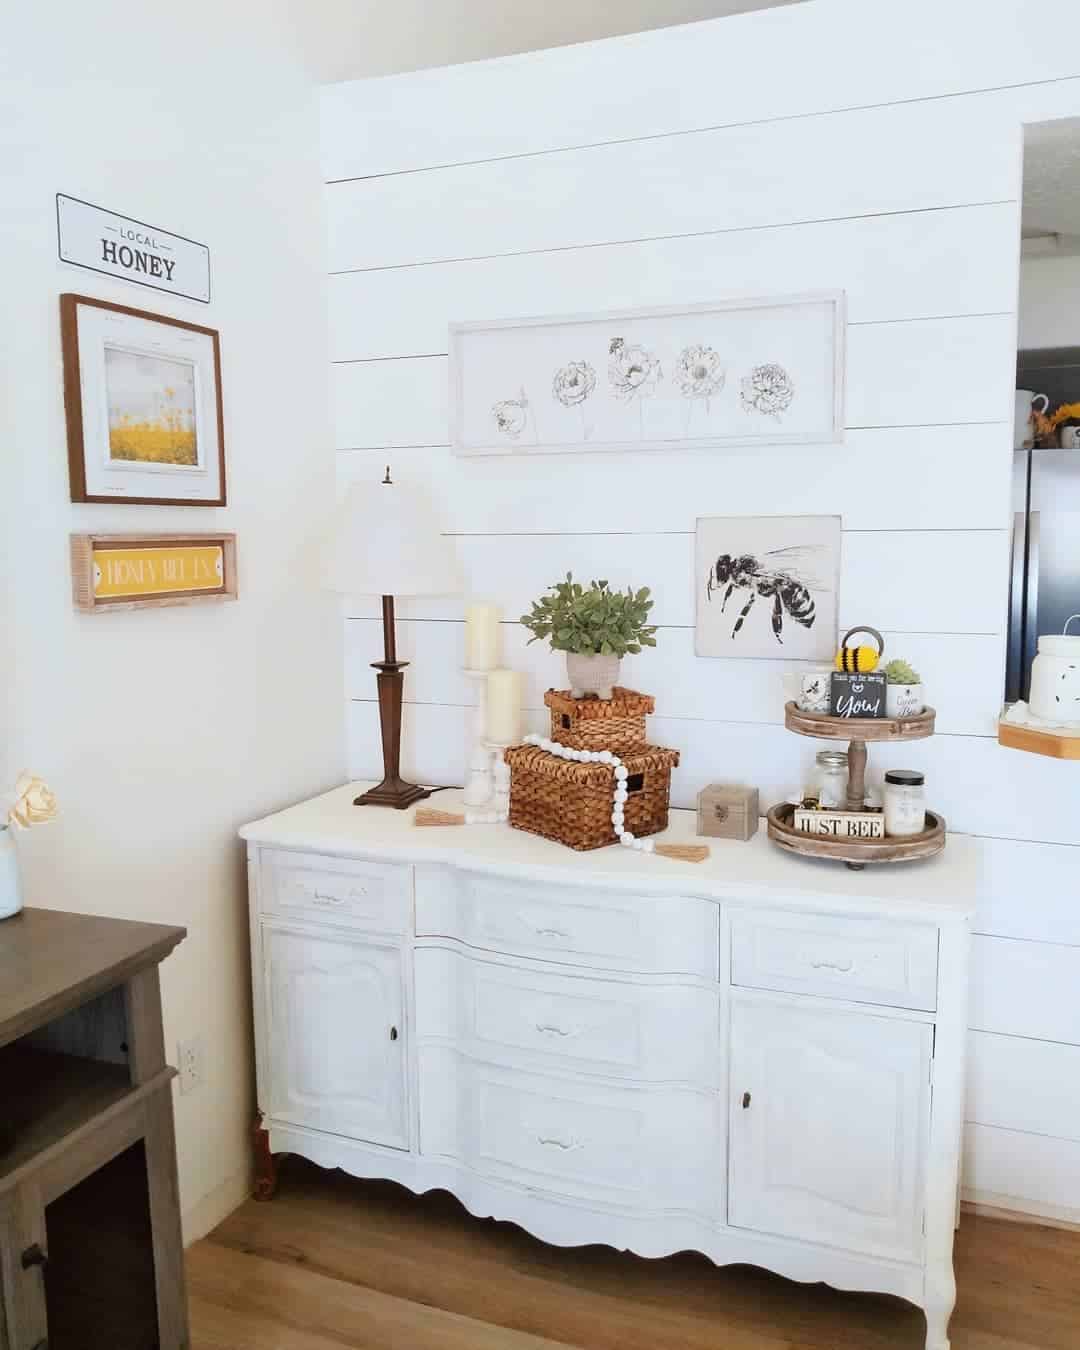 Apiarist-inspired Display With Bee Accents - Soul & Lane